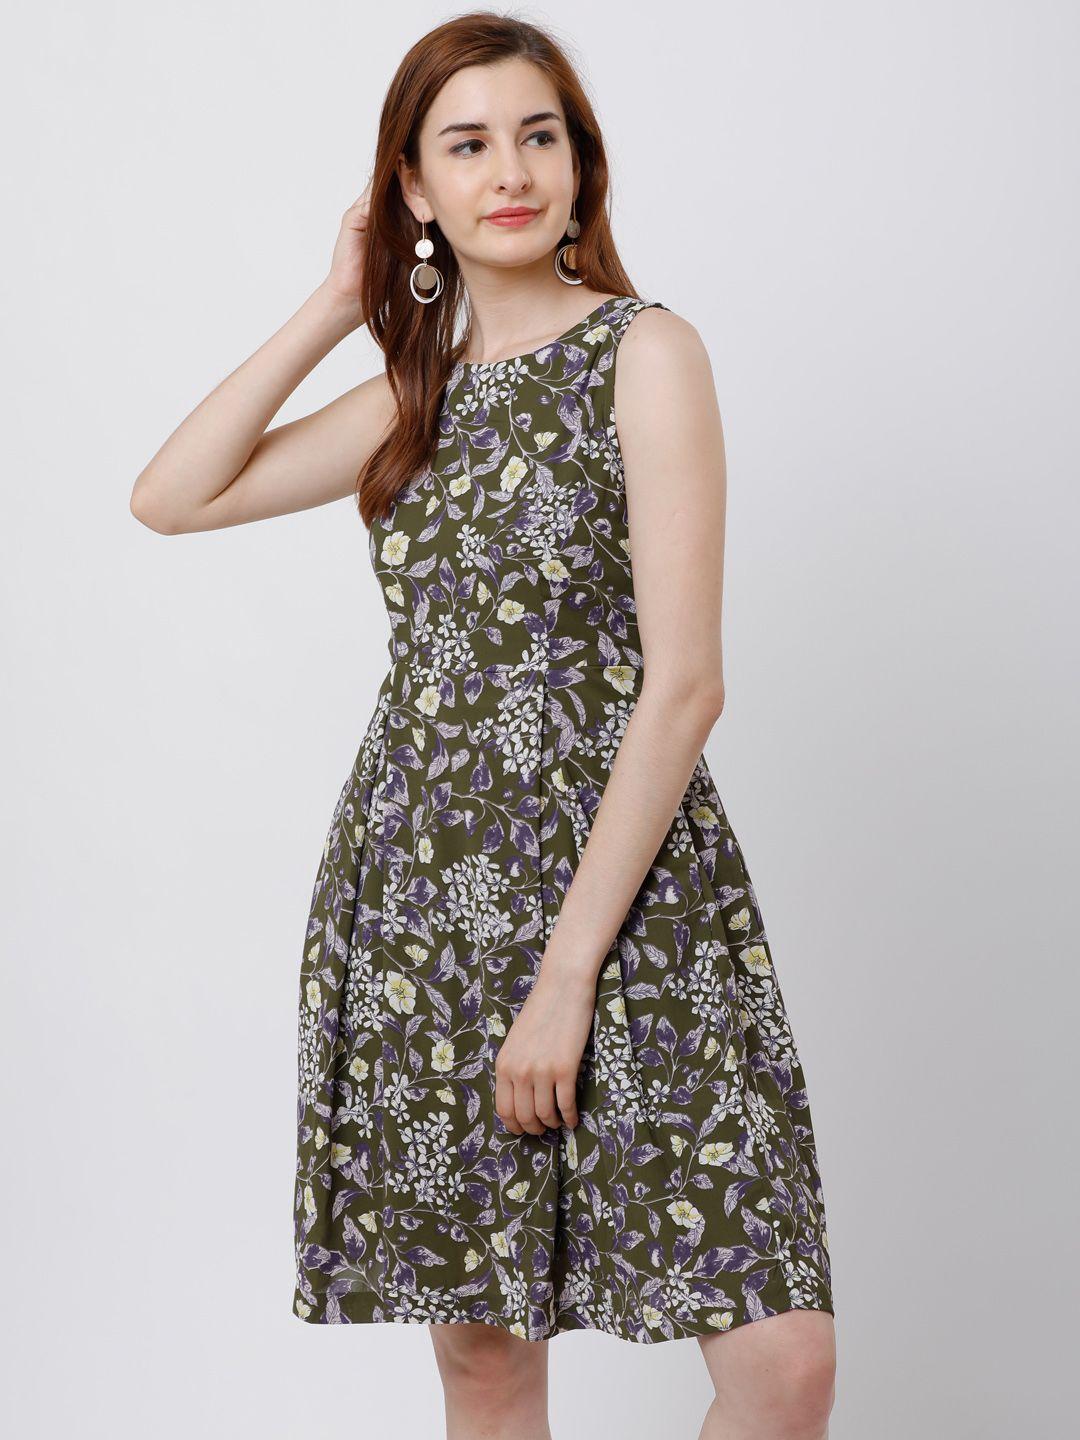 tokyo-talkies-women-olive-green-printed-fit-and-flare-dress